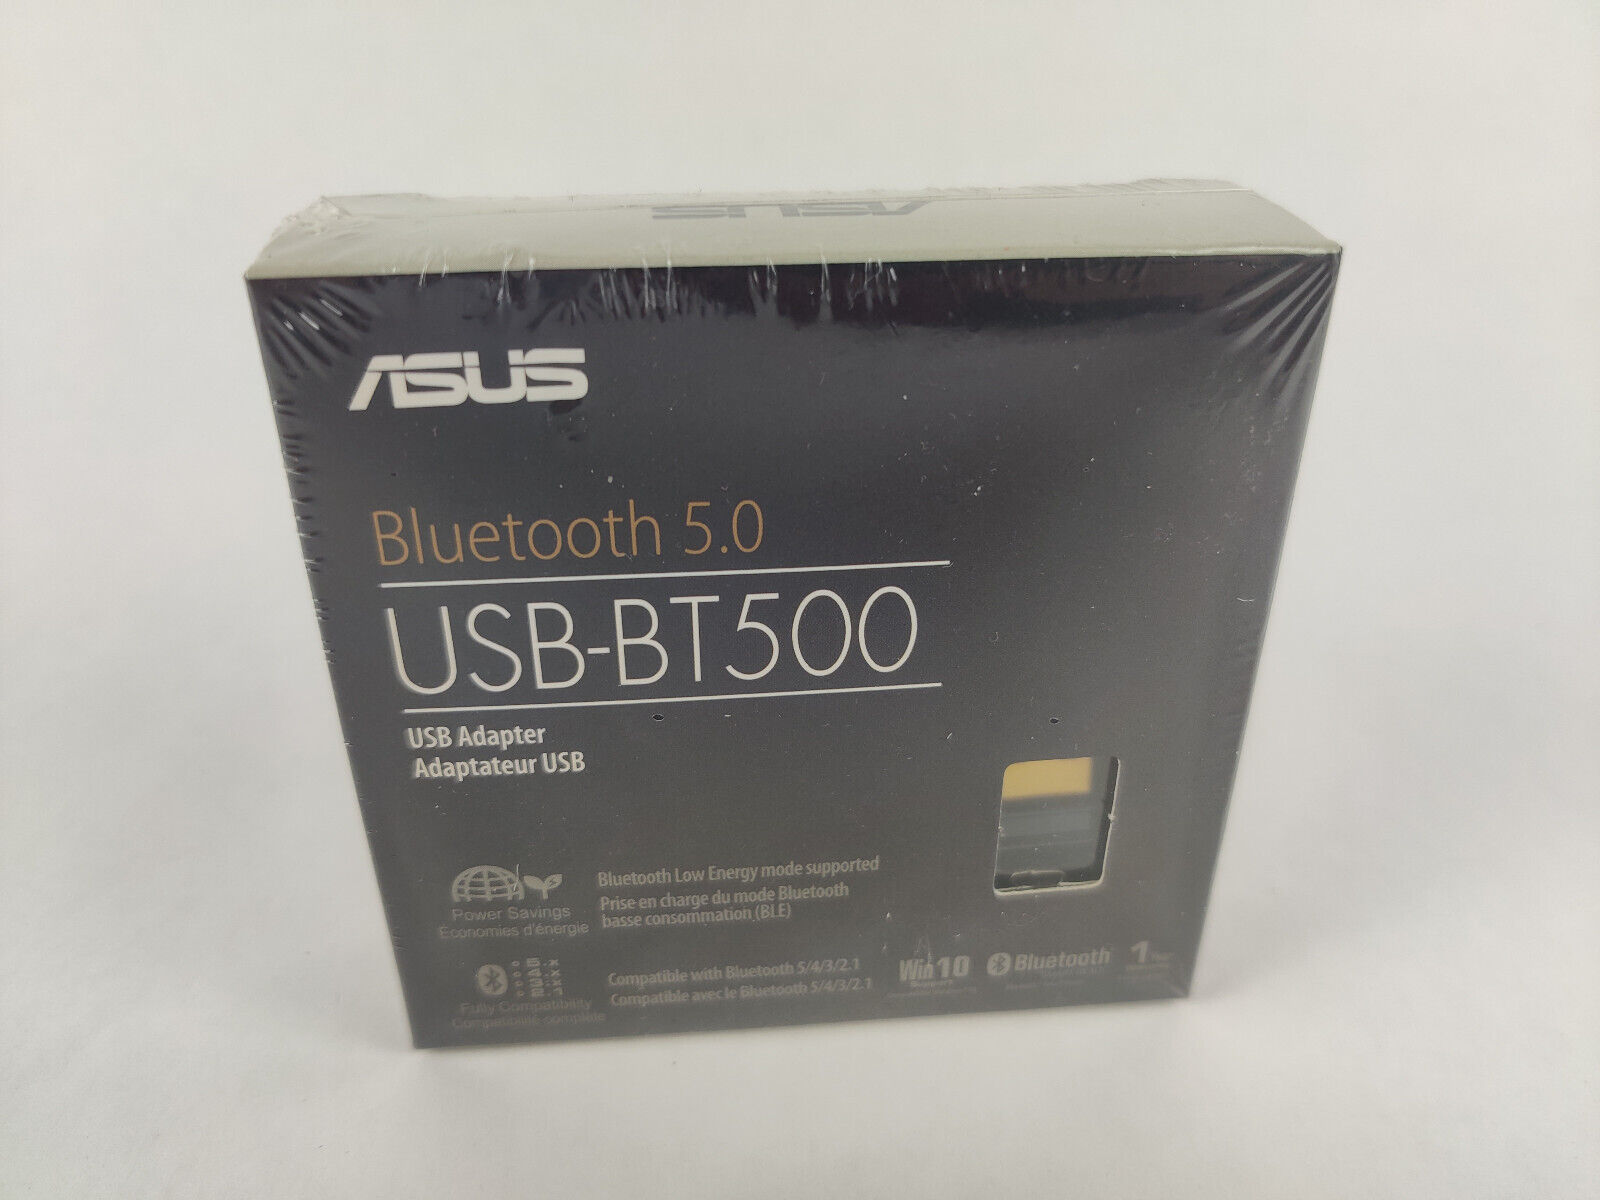 ASUS USB-BT500 Bluetooth 5.0 USB Adapter with Ultra Small bluetooth New sealed